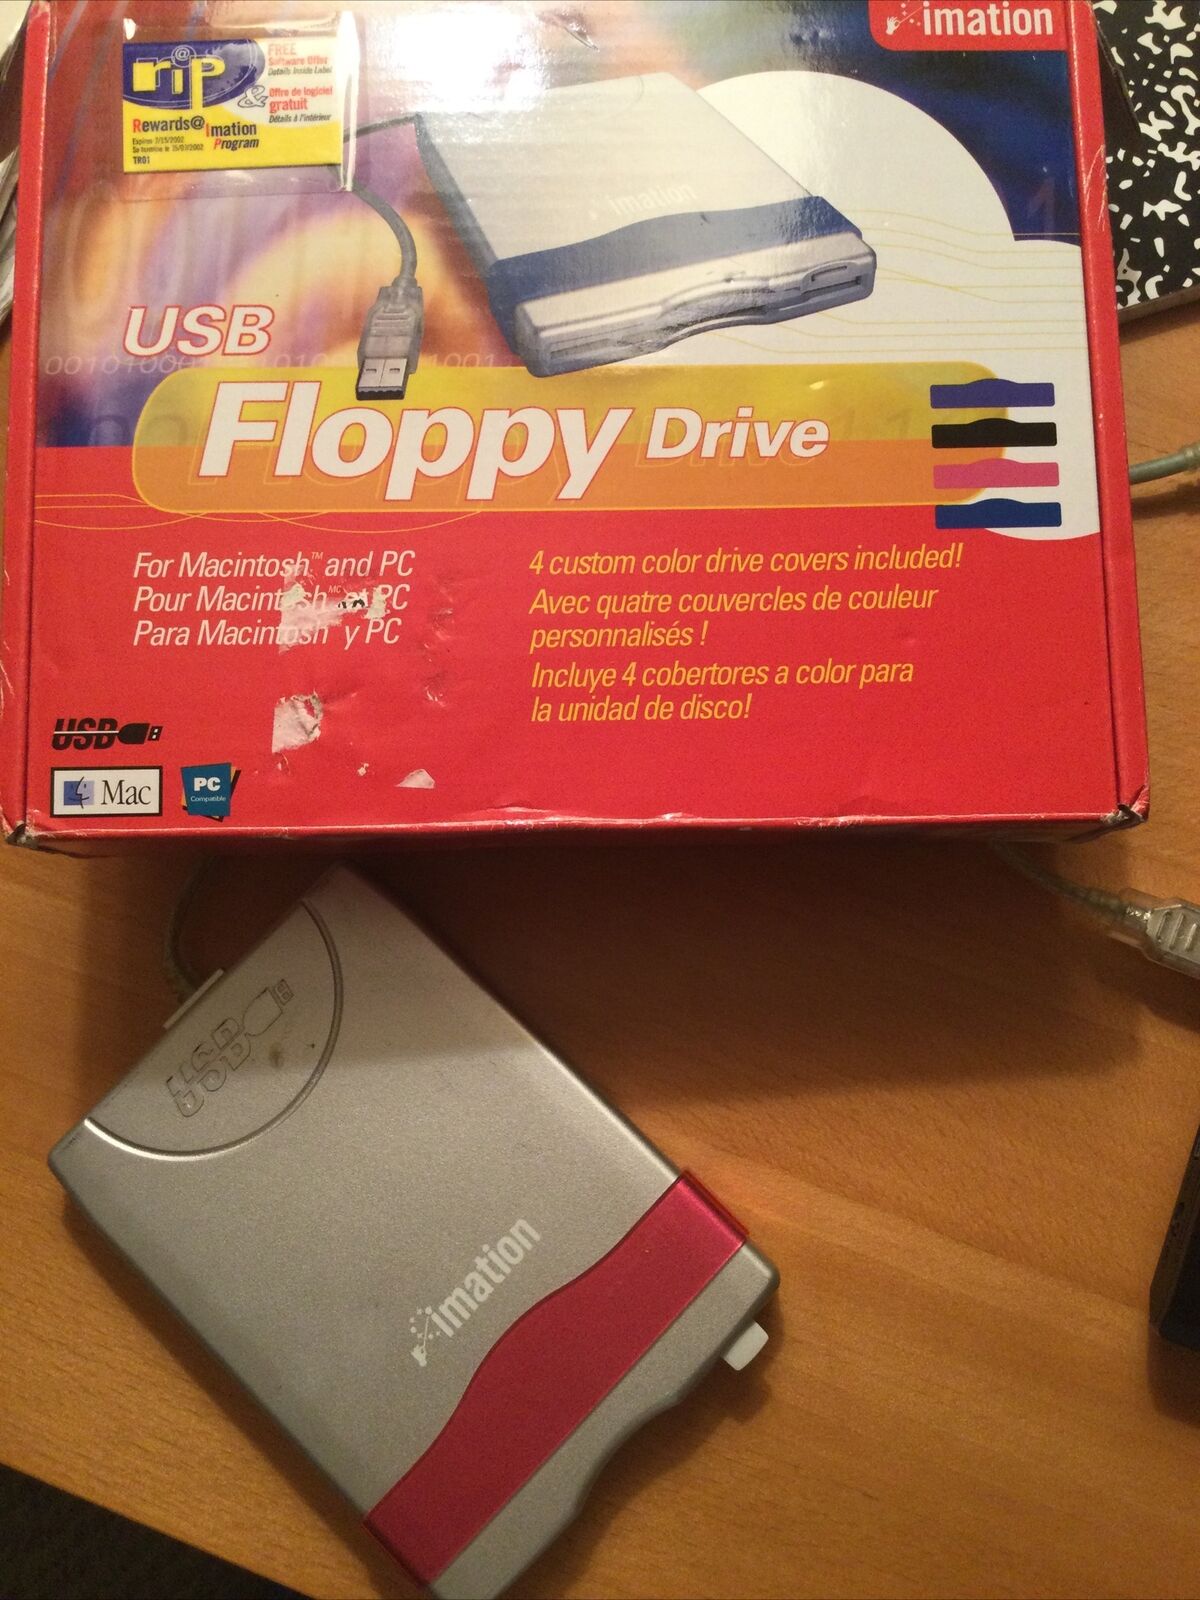 IMATION USB FLOPPY DRIVE for MAC OR PC. TESTED AND IT WORKS.